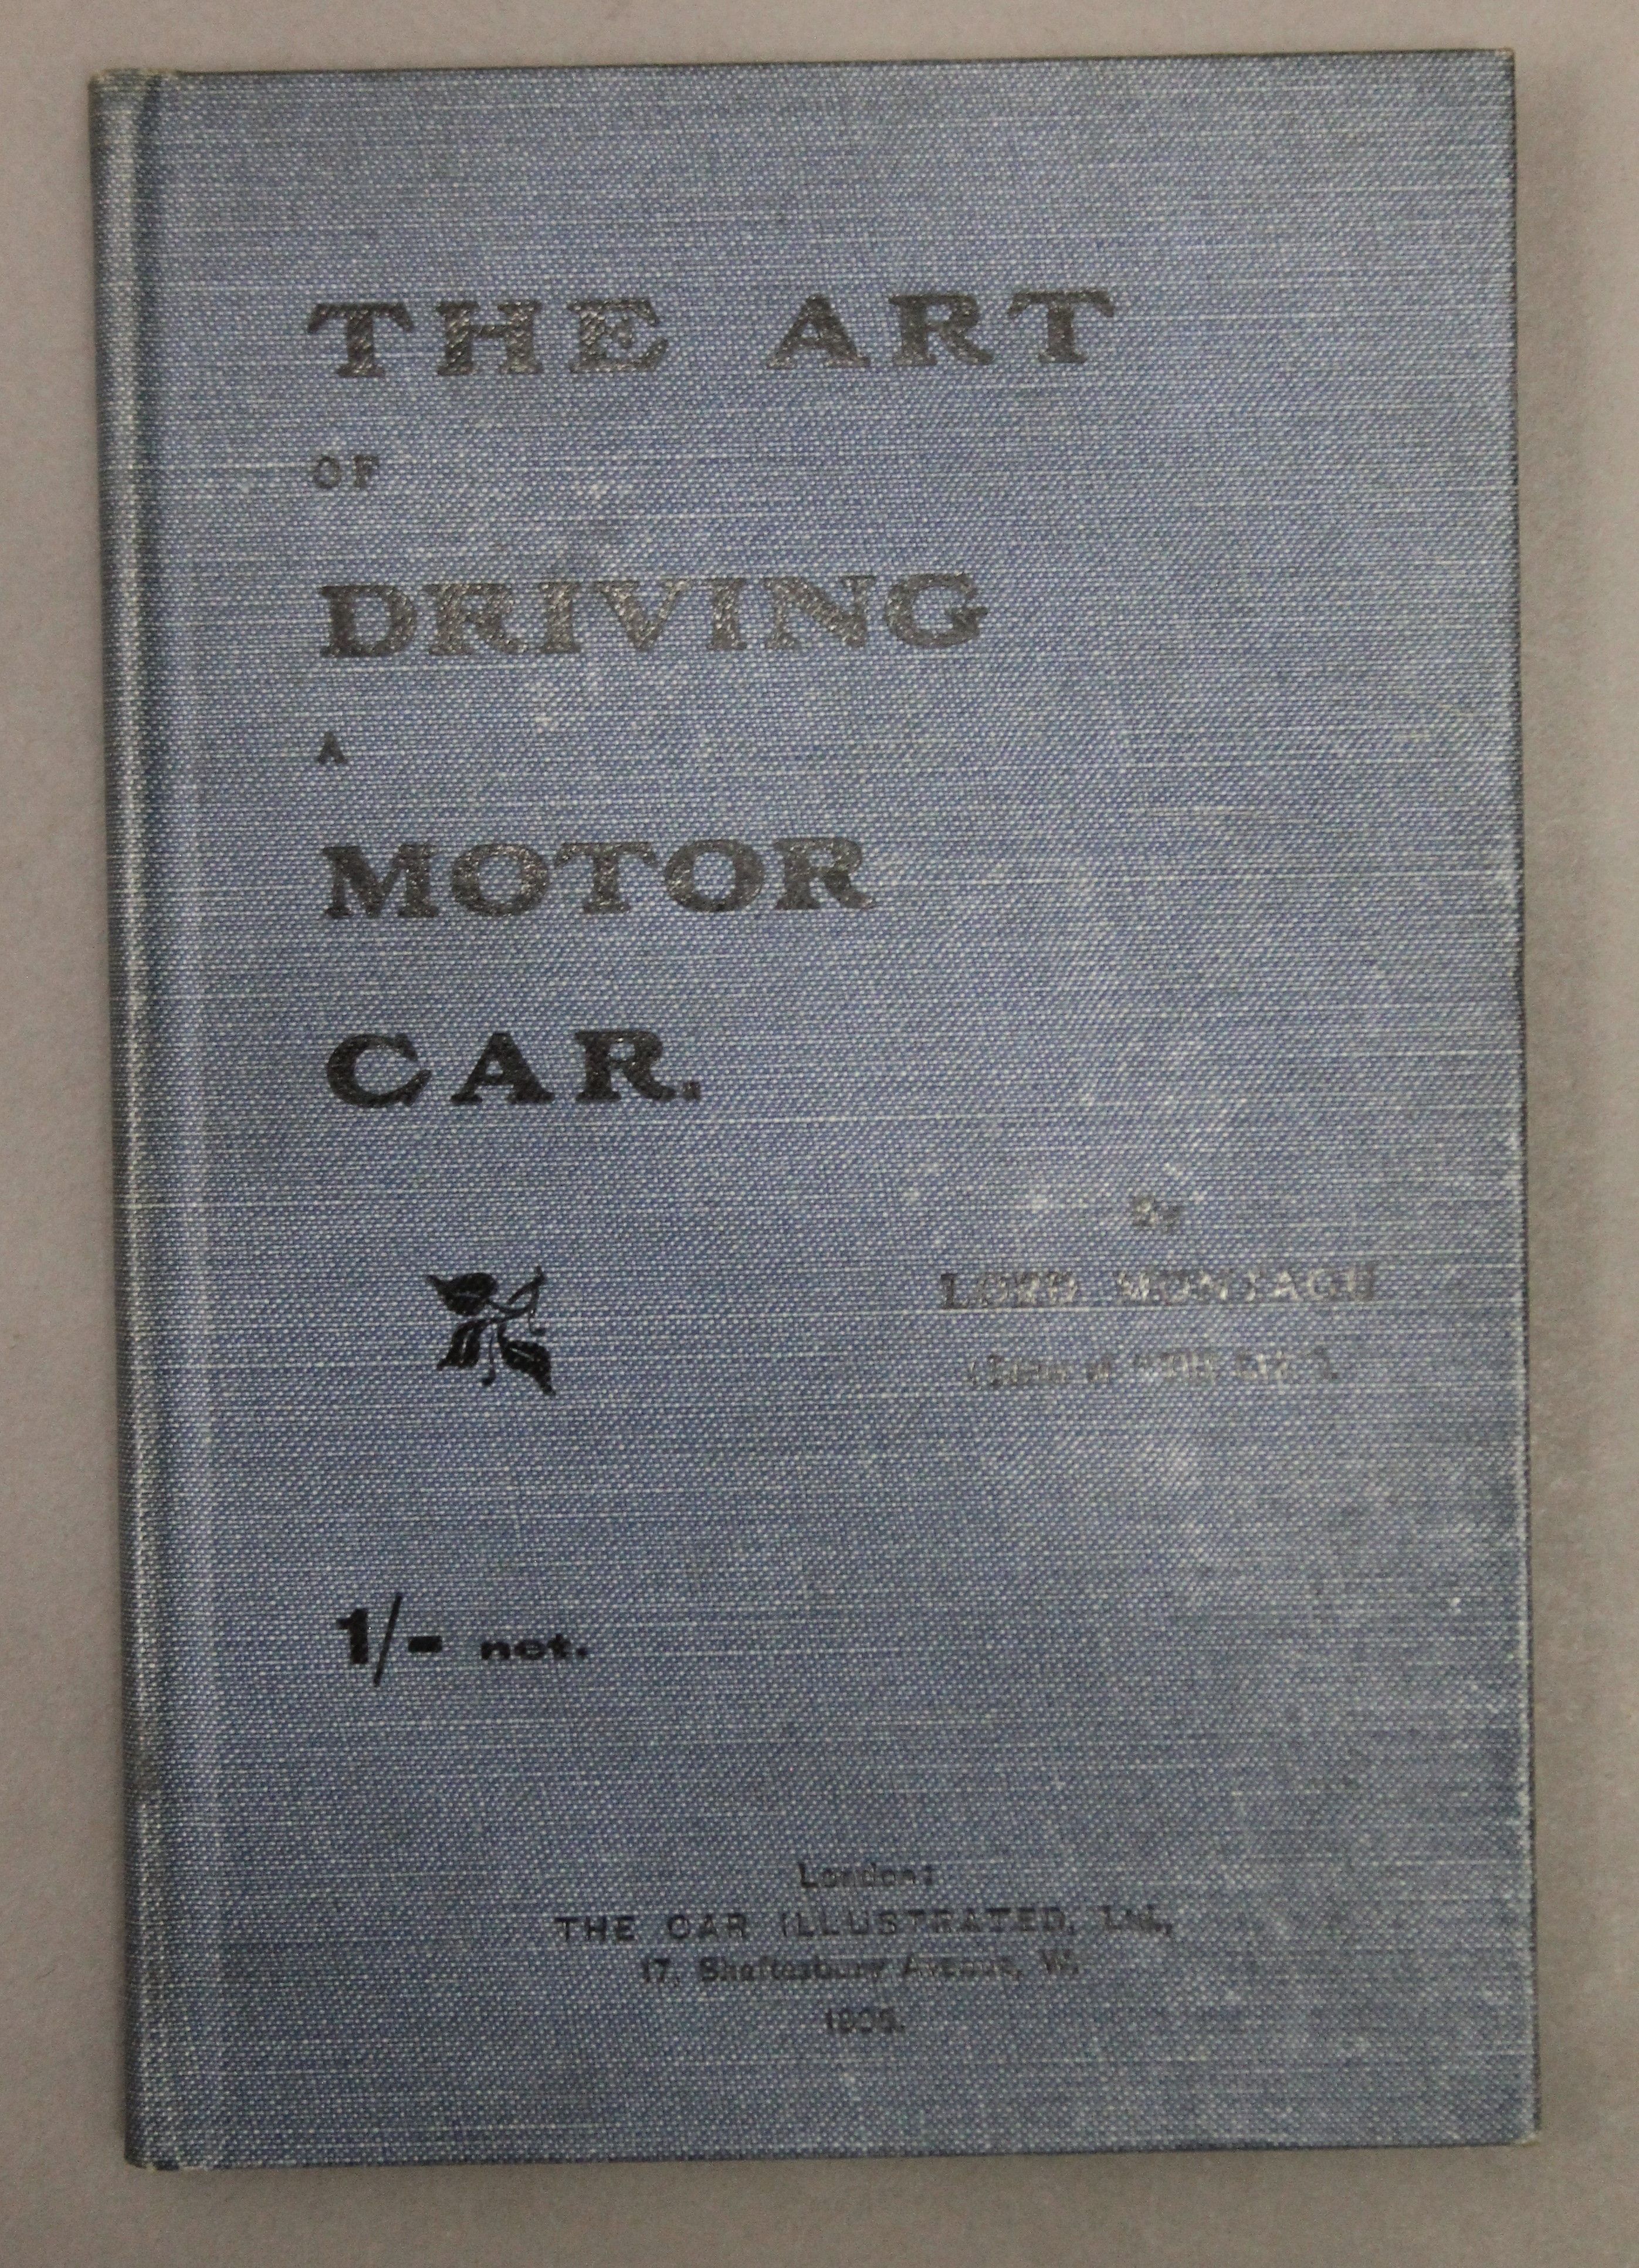 Thompson (Sir Henry), The Motor-Car Its Nature, Use and Management, Frederick Warne, - Image 39 of 56